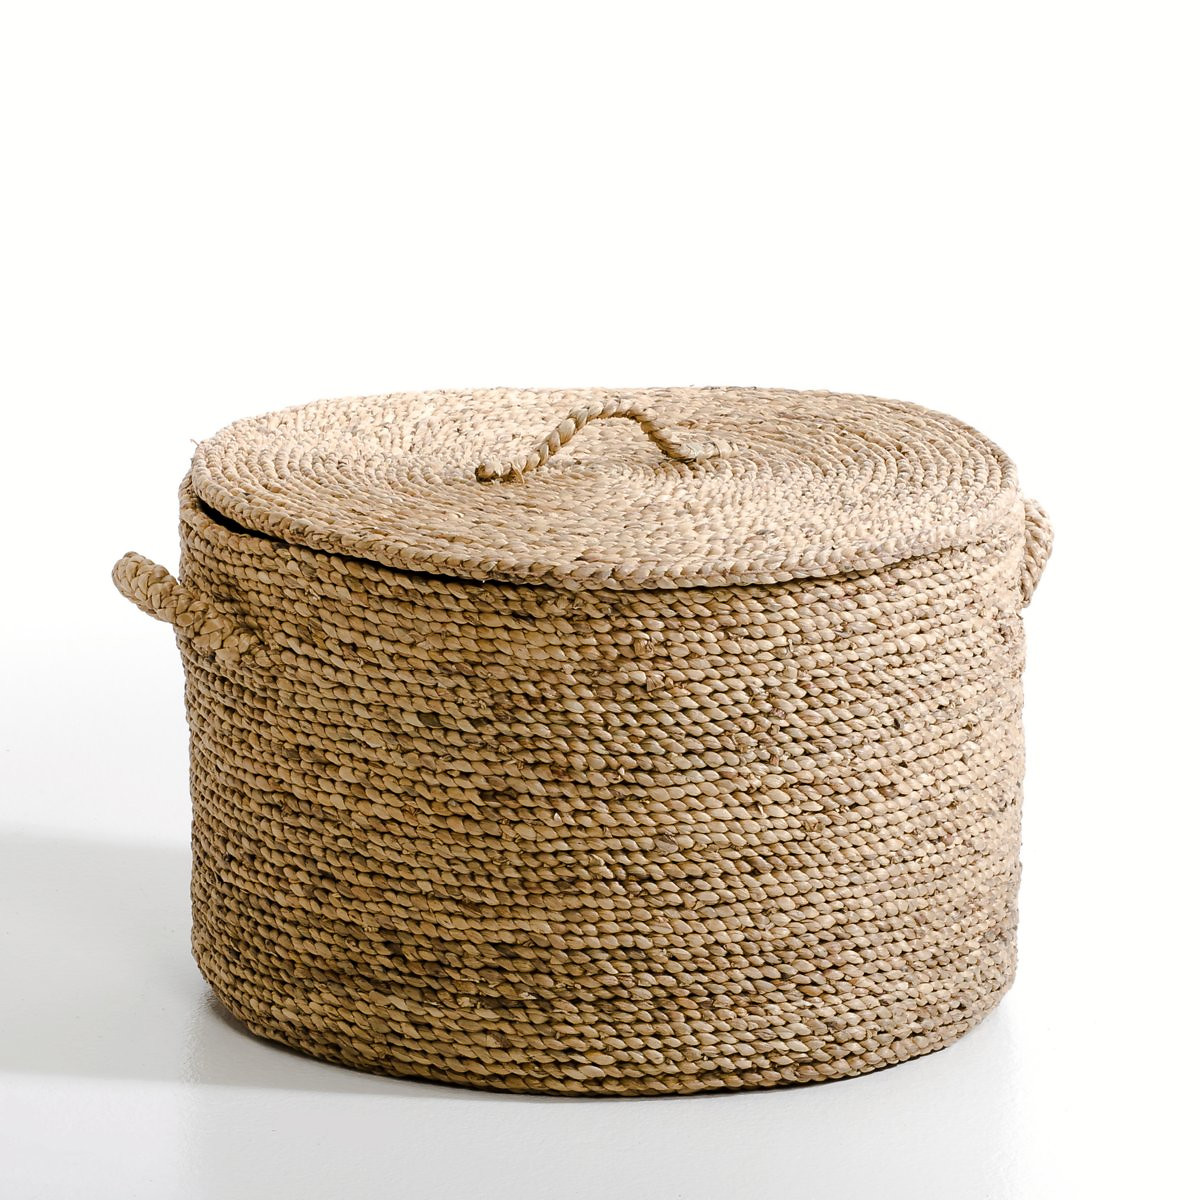 Lian Round Woven Basket H36 5cm, Round Woven Basket With Lid